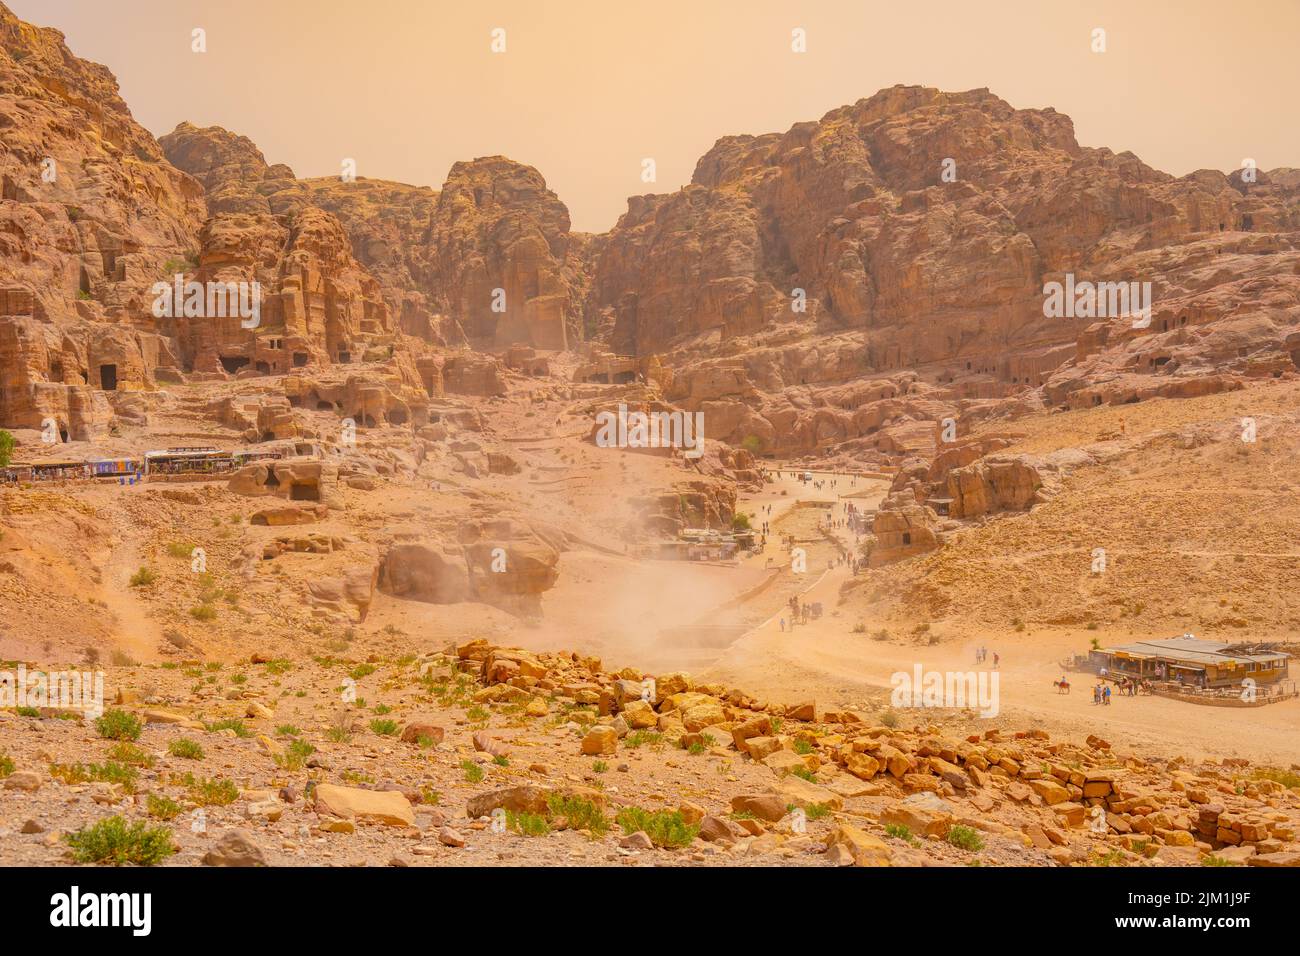 Looking towards the street of Facades in Petra Jordan. With a dust storm blowing through Stock Photo